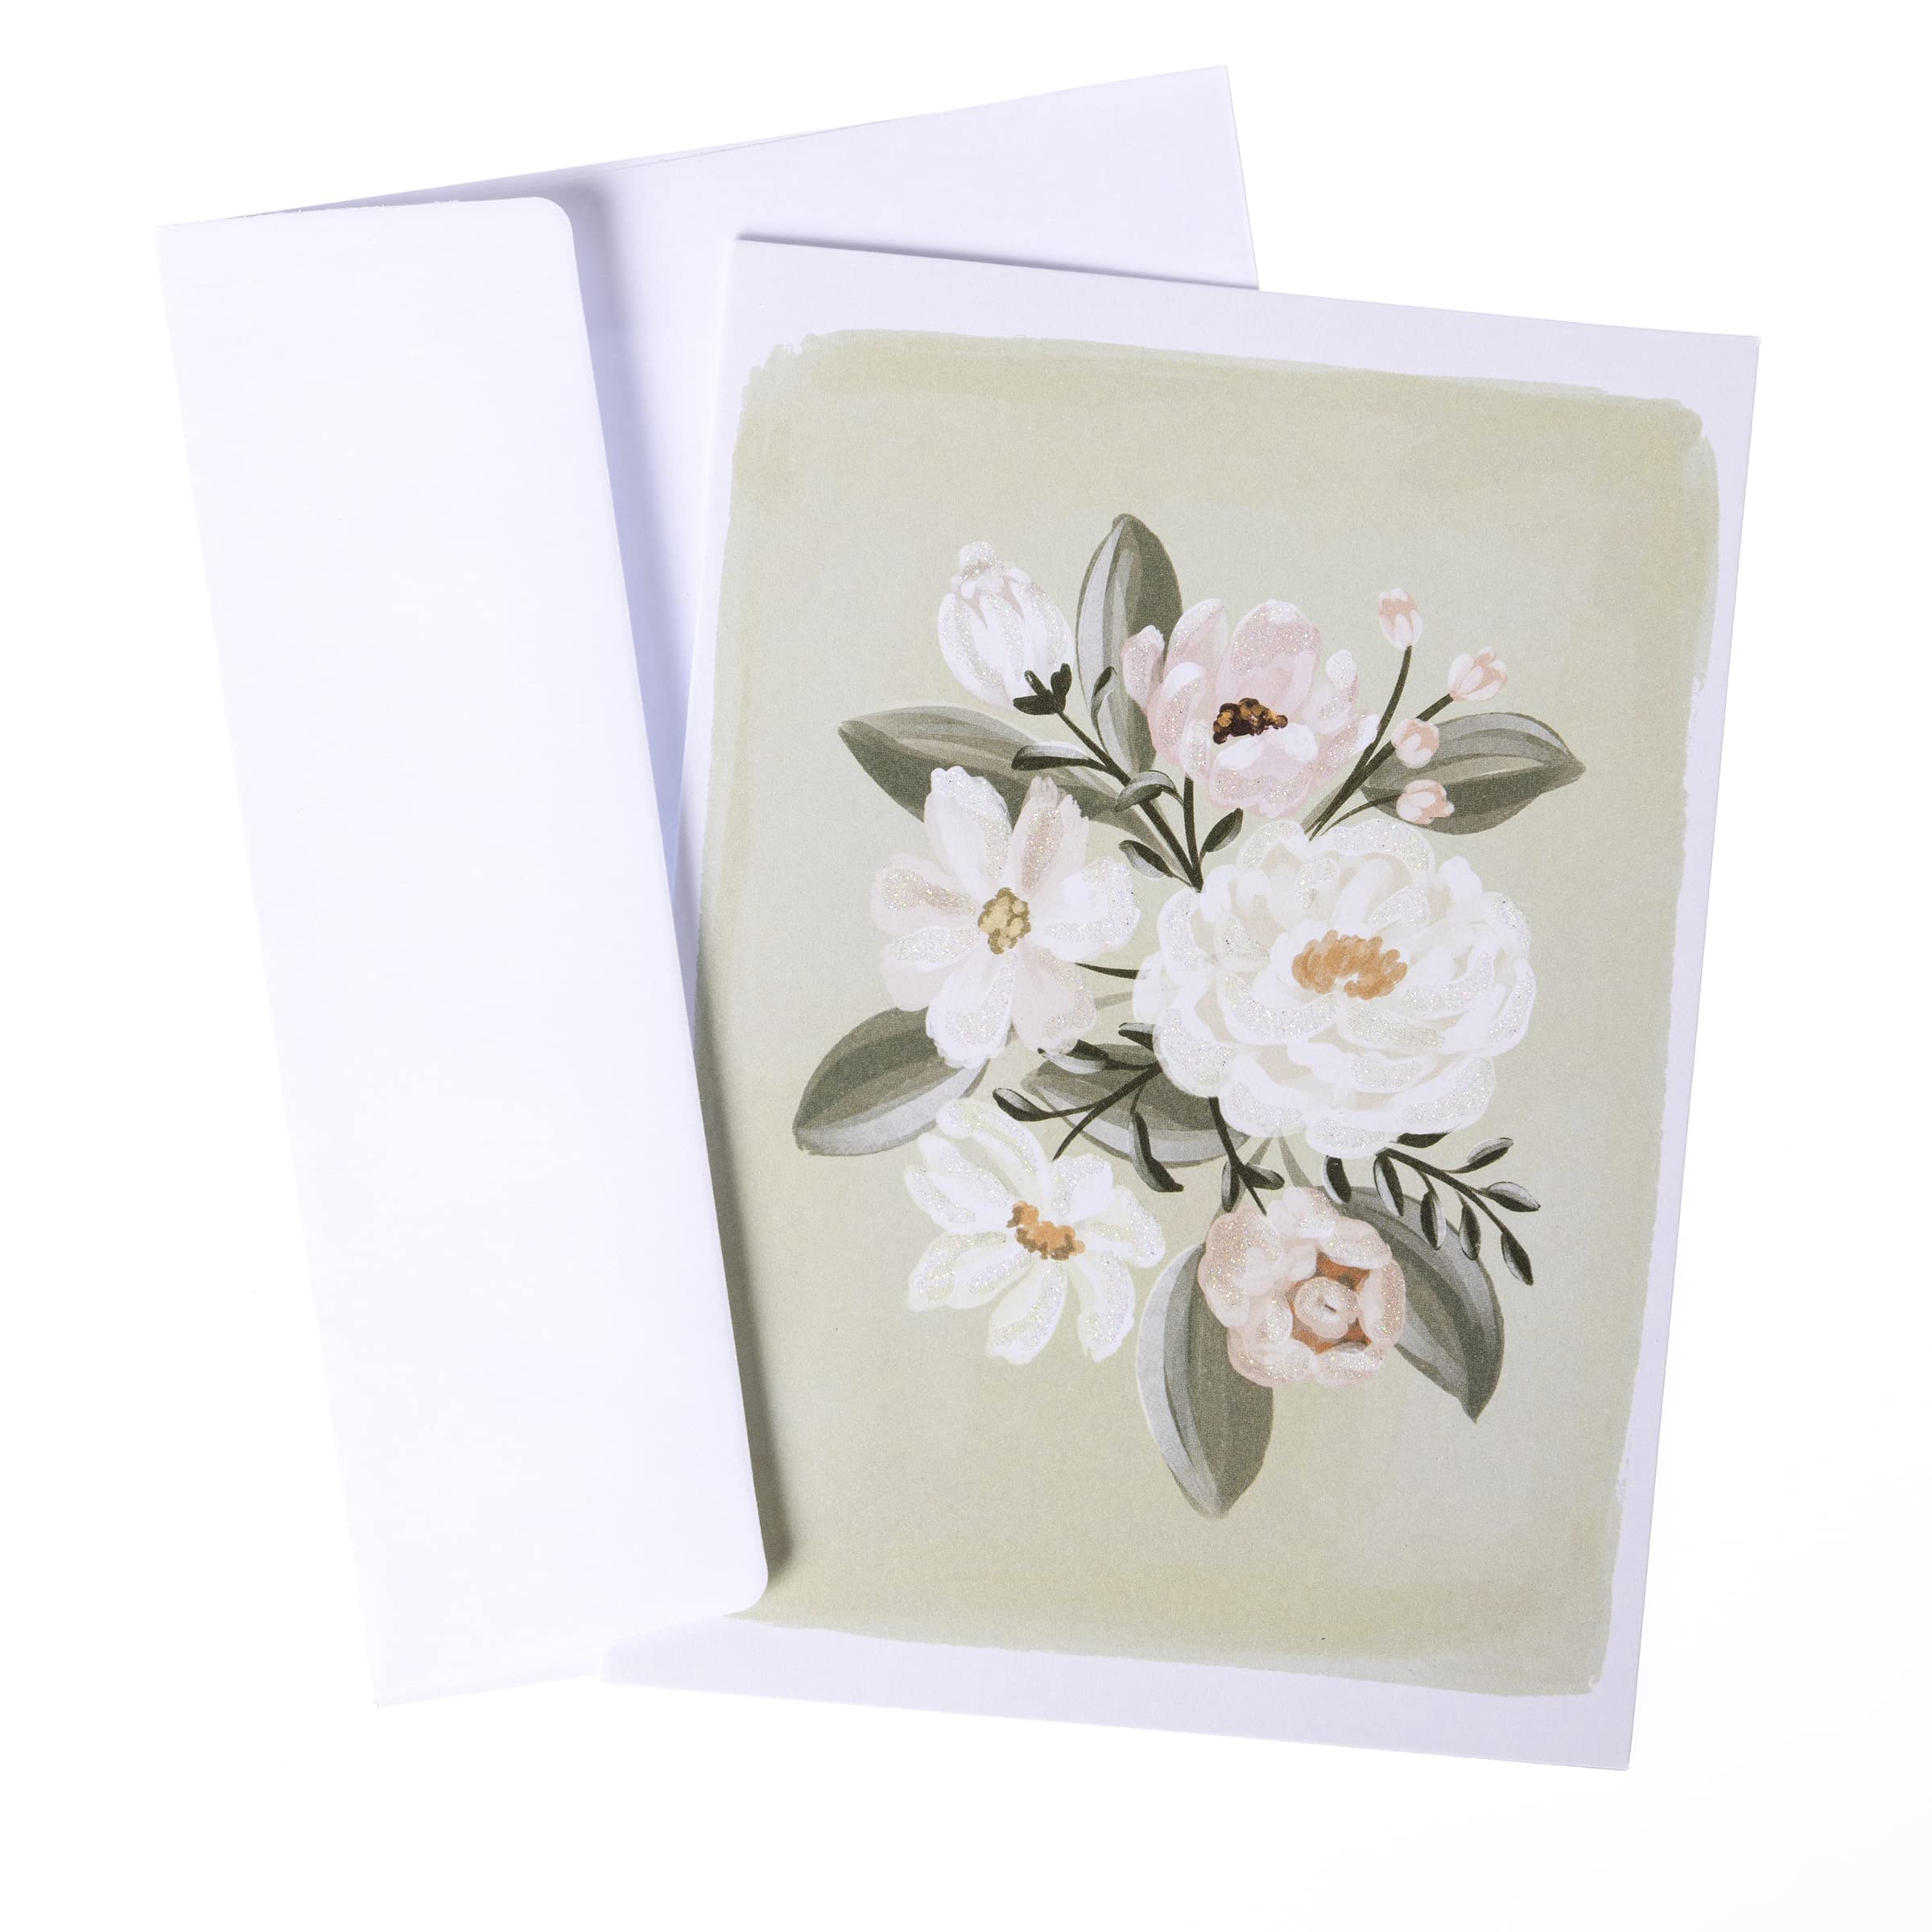 Graphique Floral Assorted Cards | Pack of 20 Blank Cards with Envelopes | All Occasion Greetings | 4 Assorted Designs with Glitter Accents | Boxed Set for Personalized Notes | 4.25